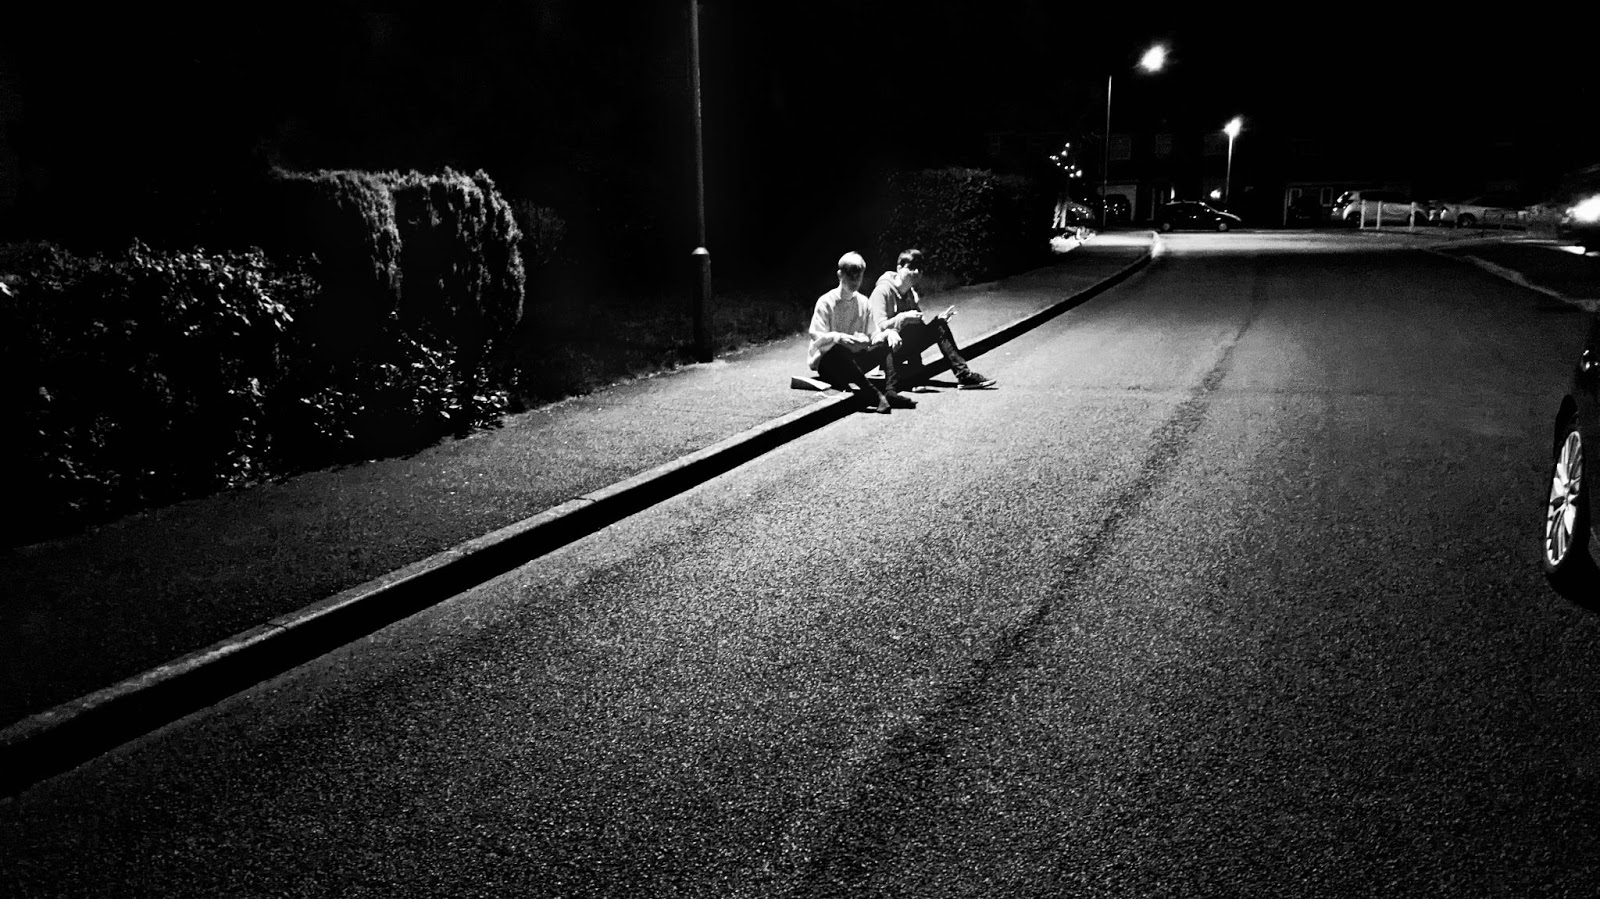 A black and white photo of two boys sitting on a curb under a street light